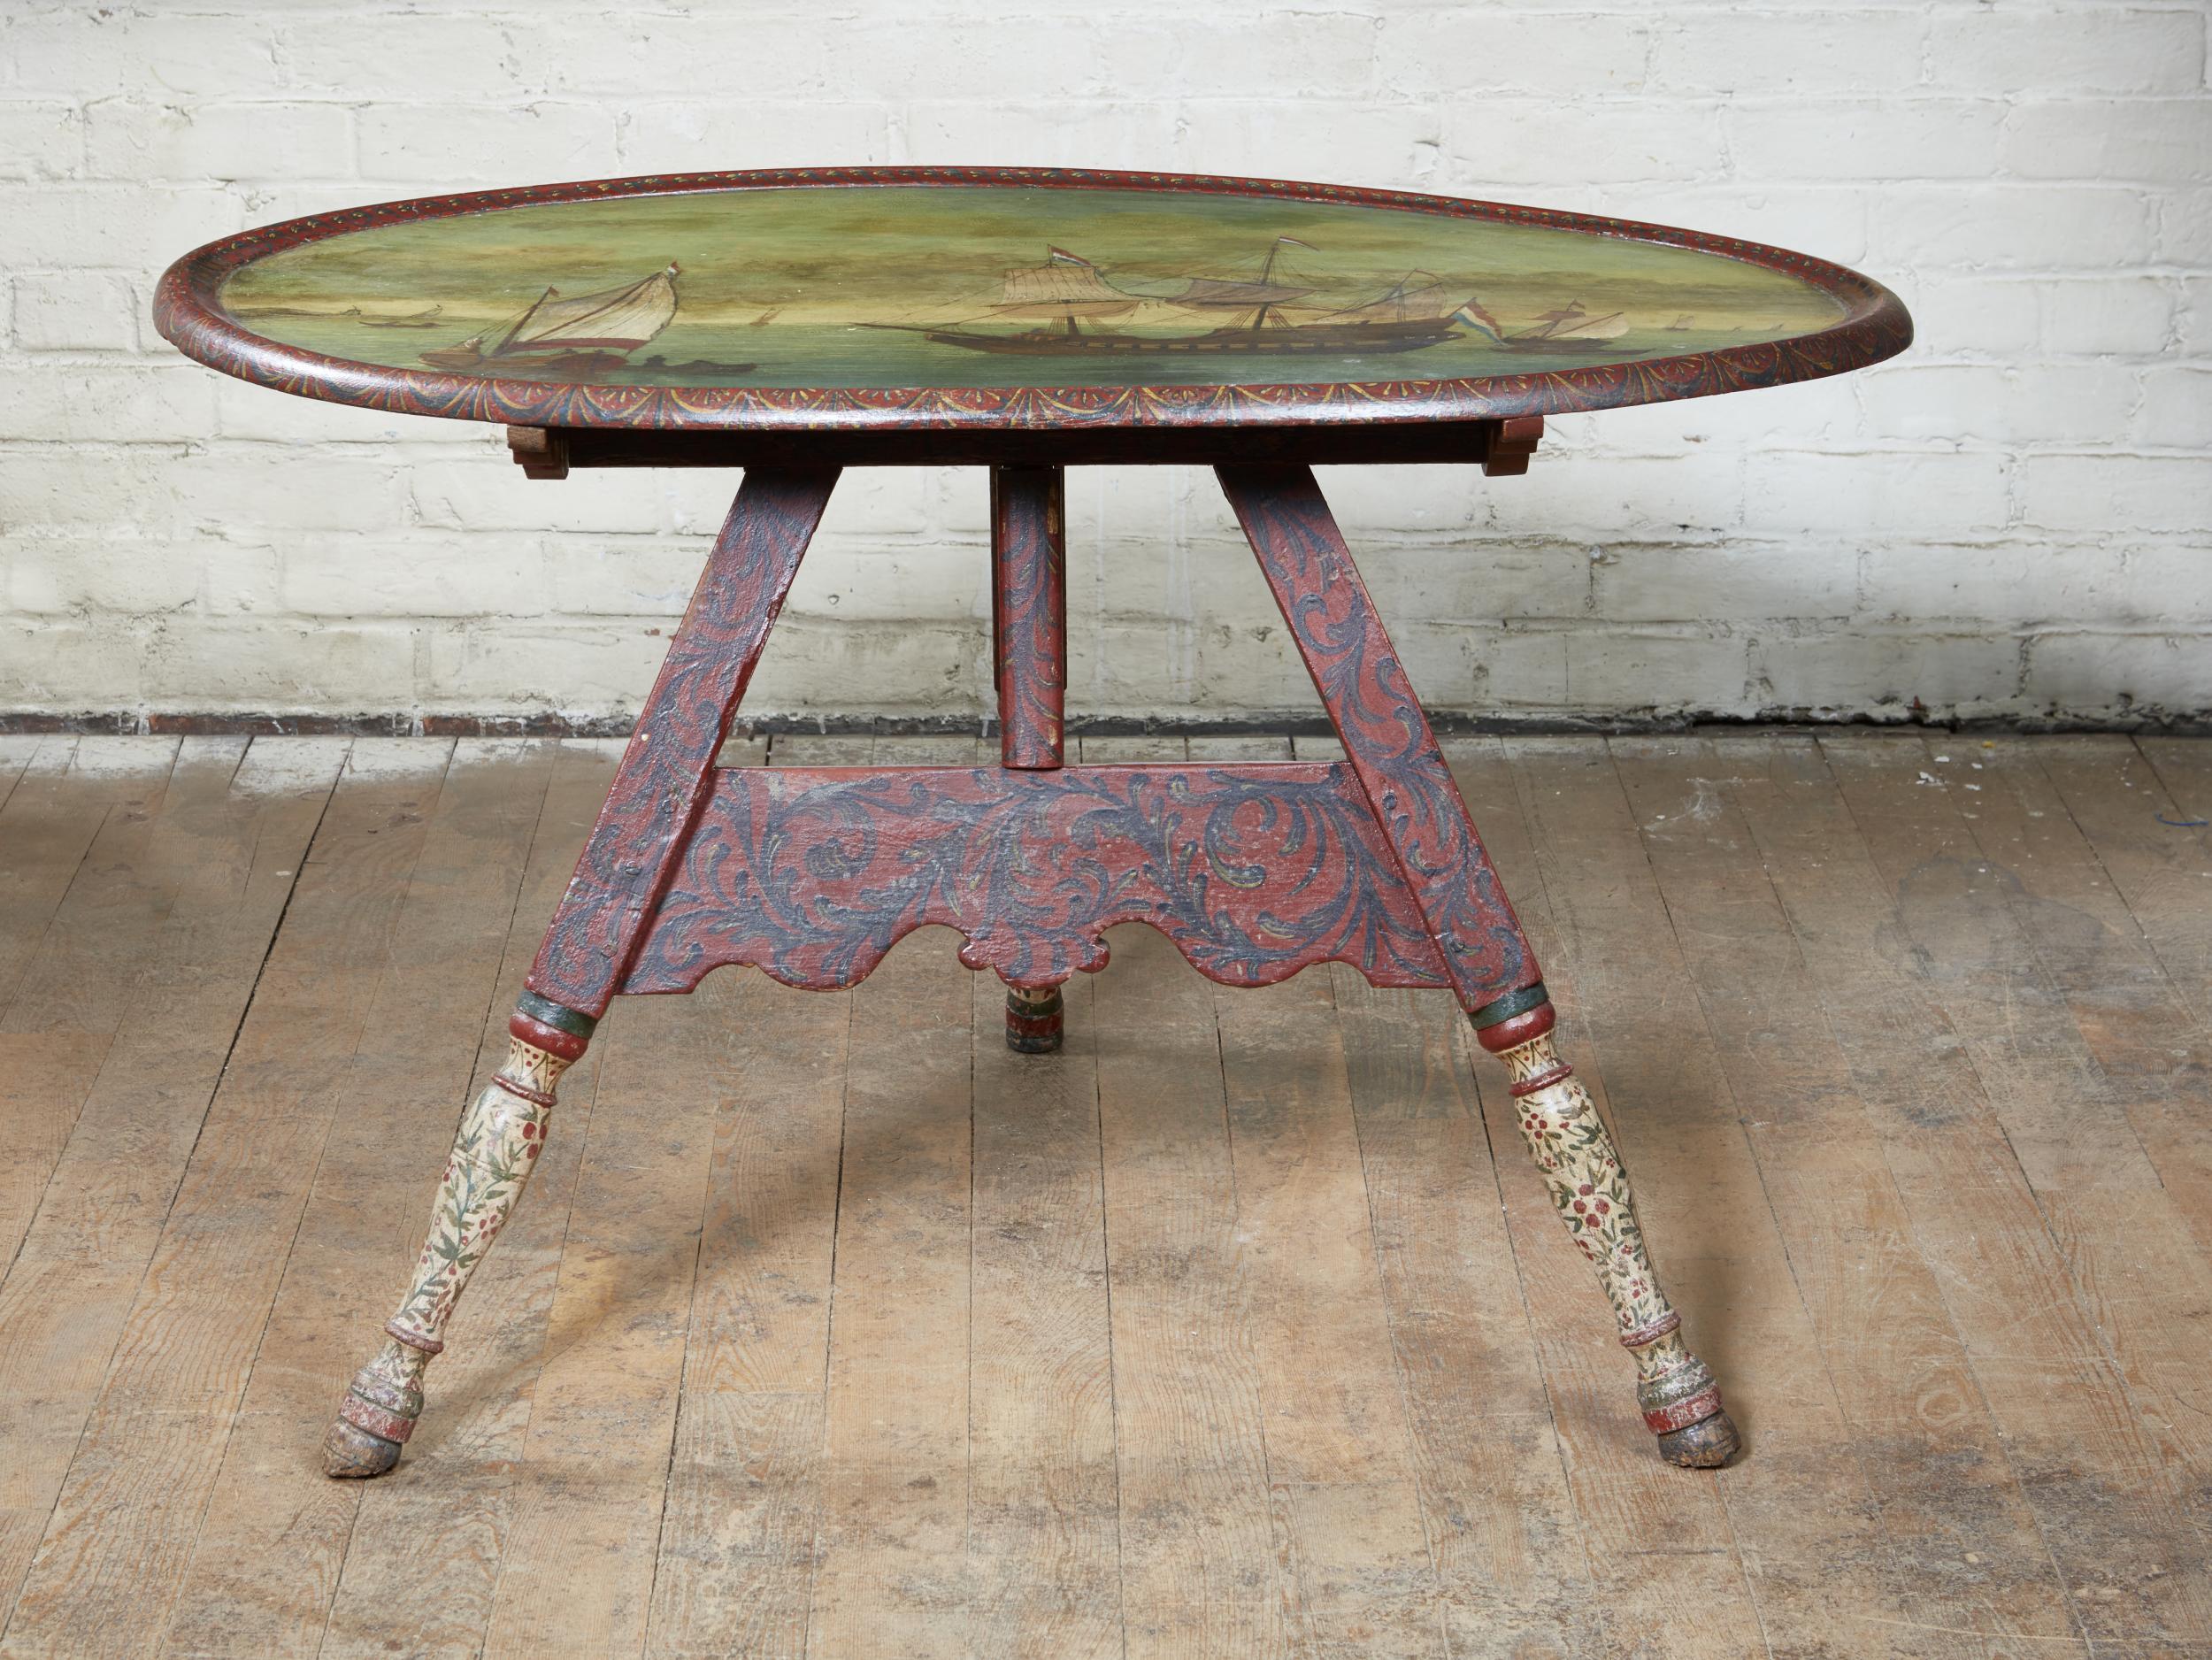 Painted Dutch Folk Art “Hindeloopen” Table For Sale